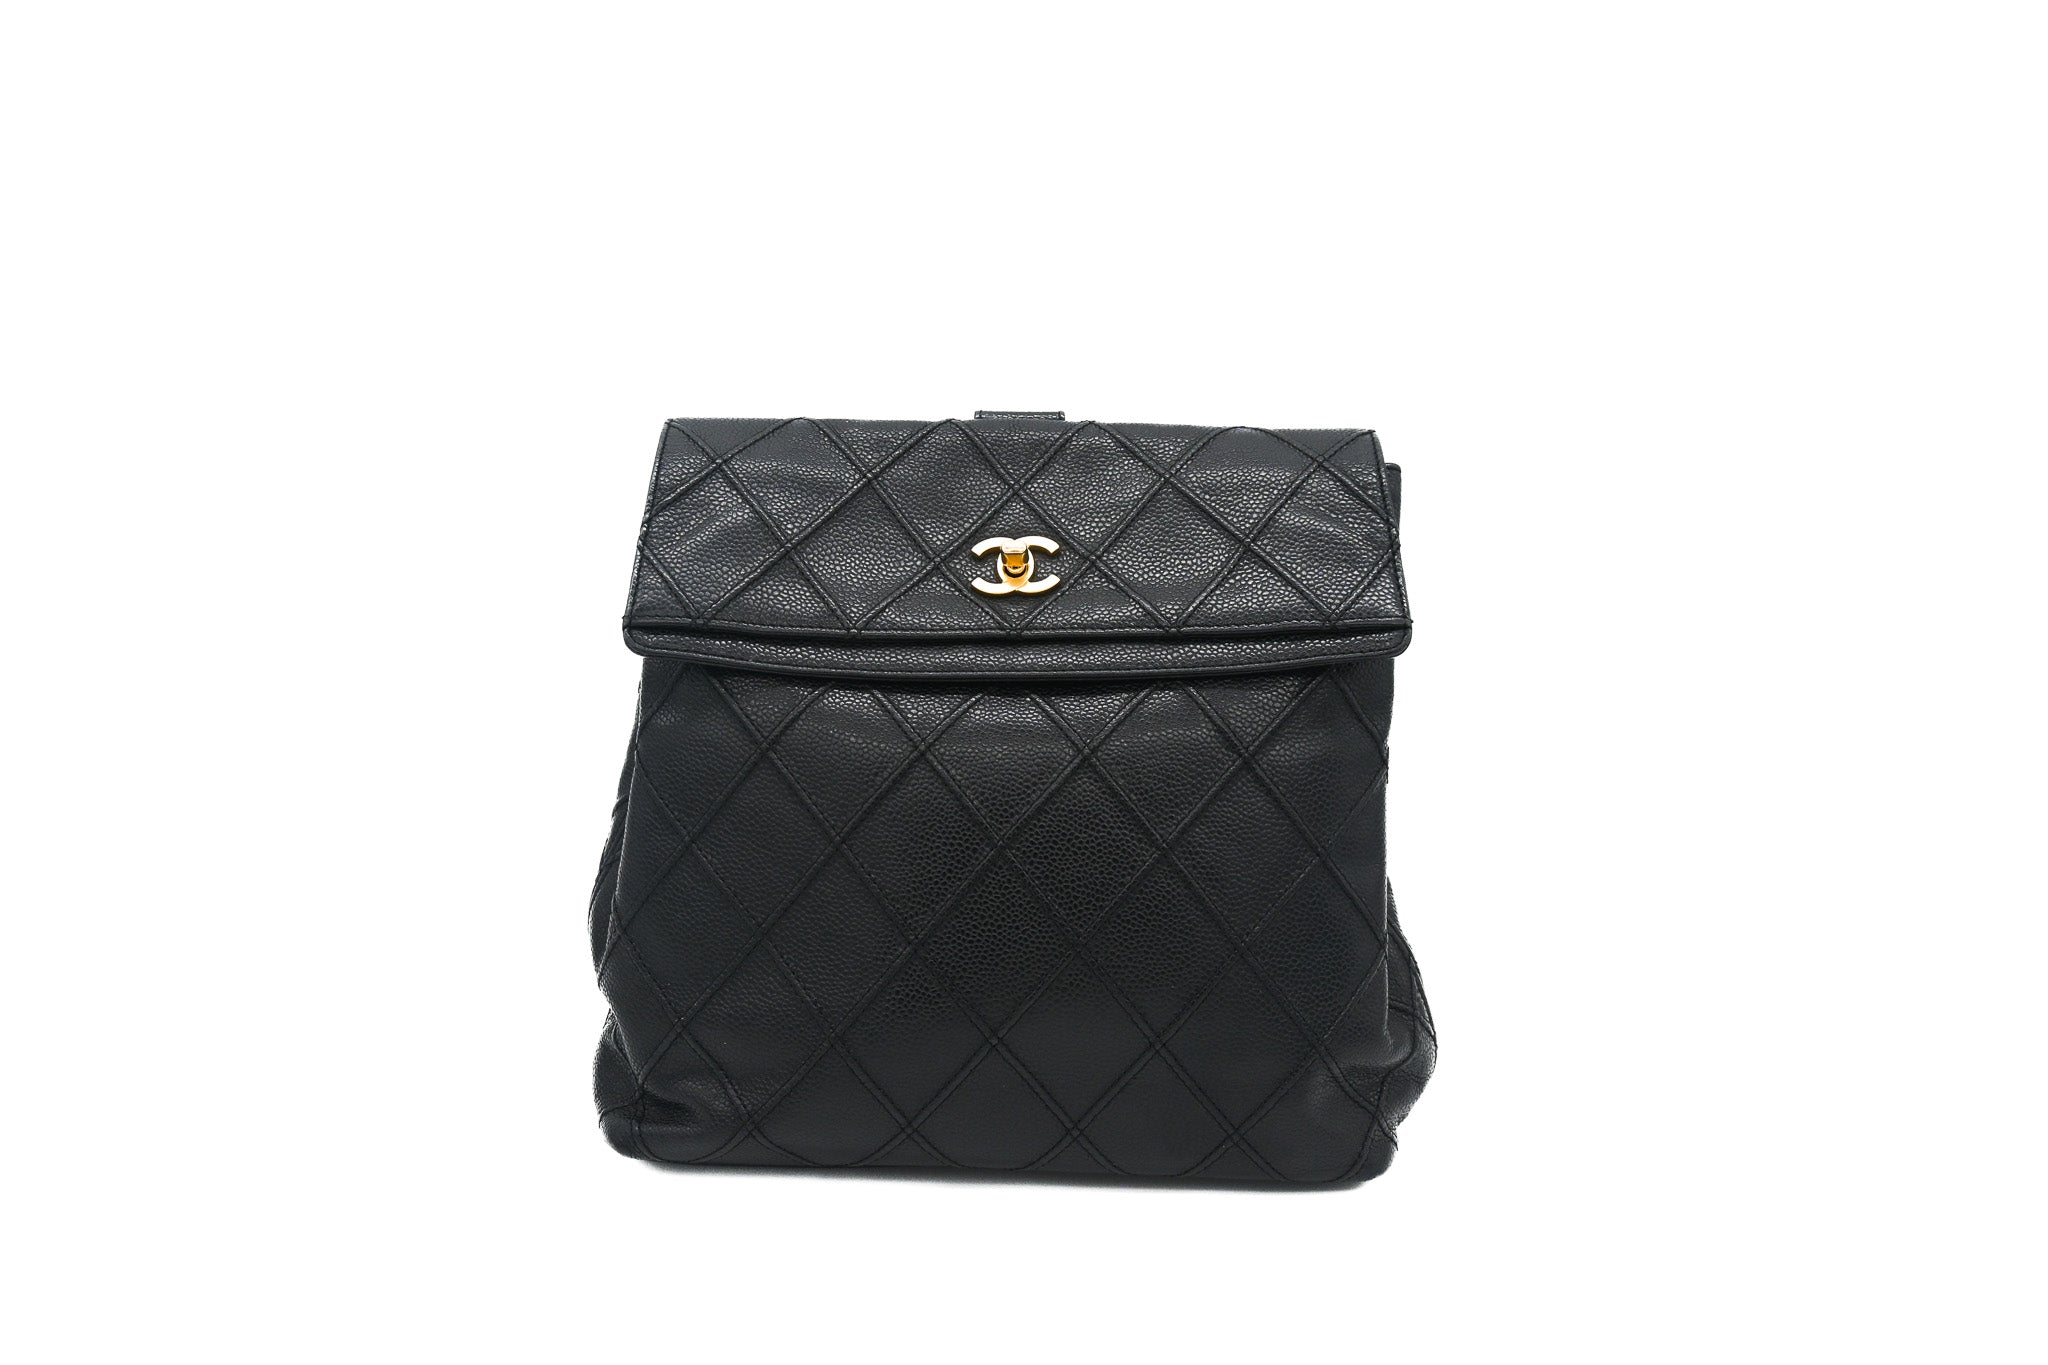 CHANEL Chanel Vintage Square Quilted Caviar Backpack in Black with Gold Hardware - Vault 55